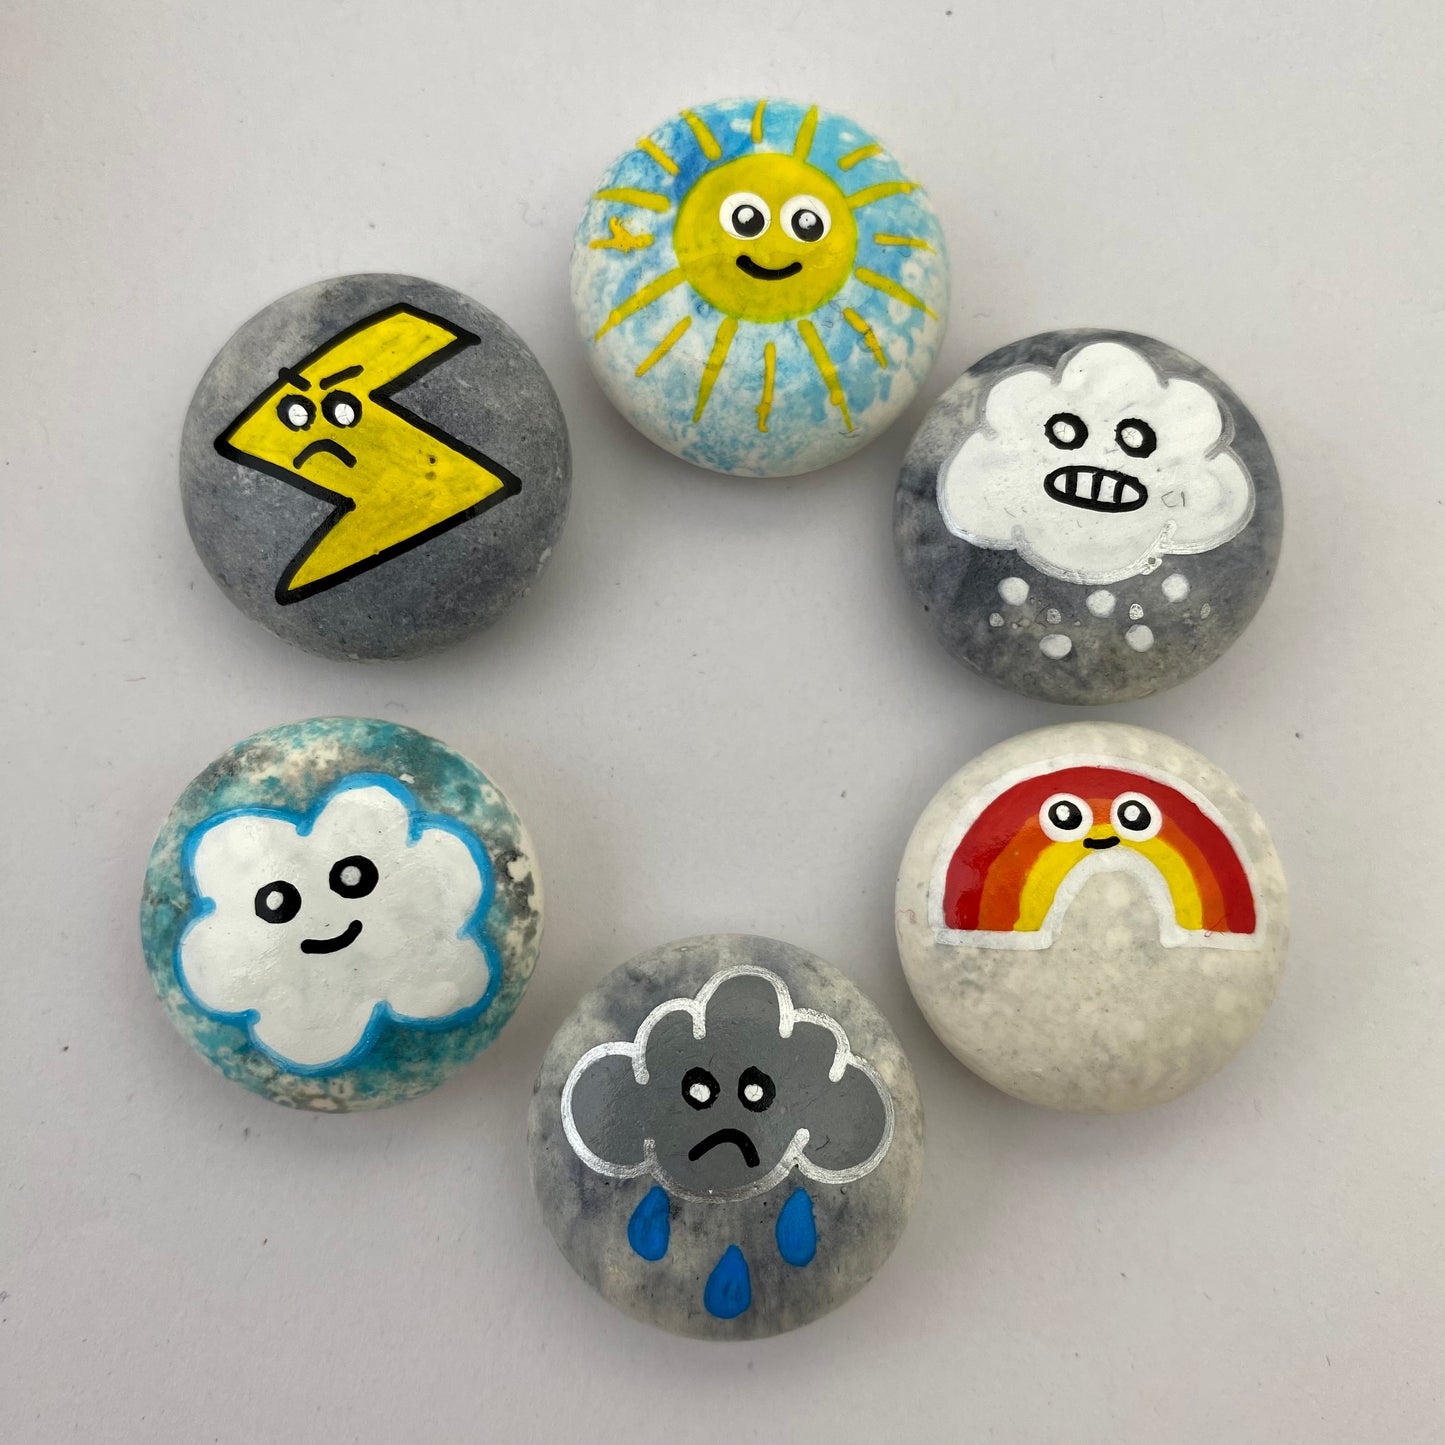 6 small hand painted weather themed pebbles